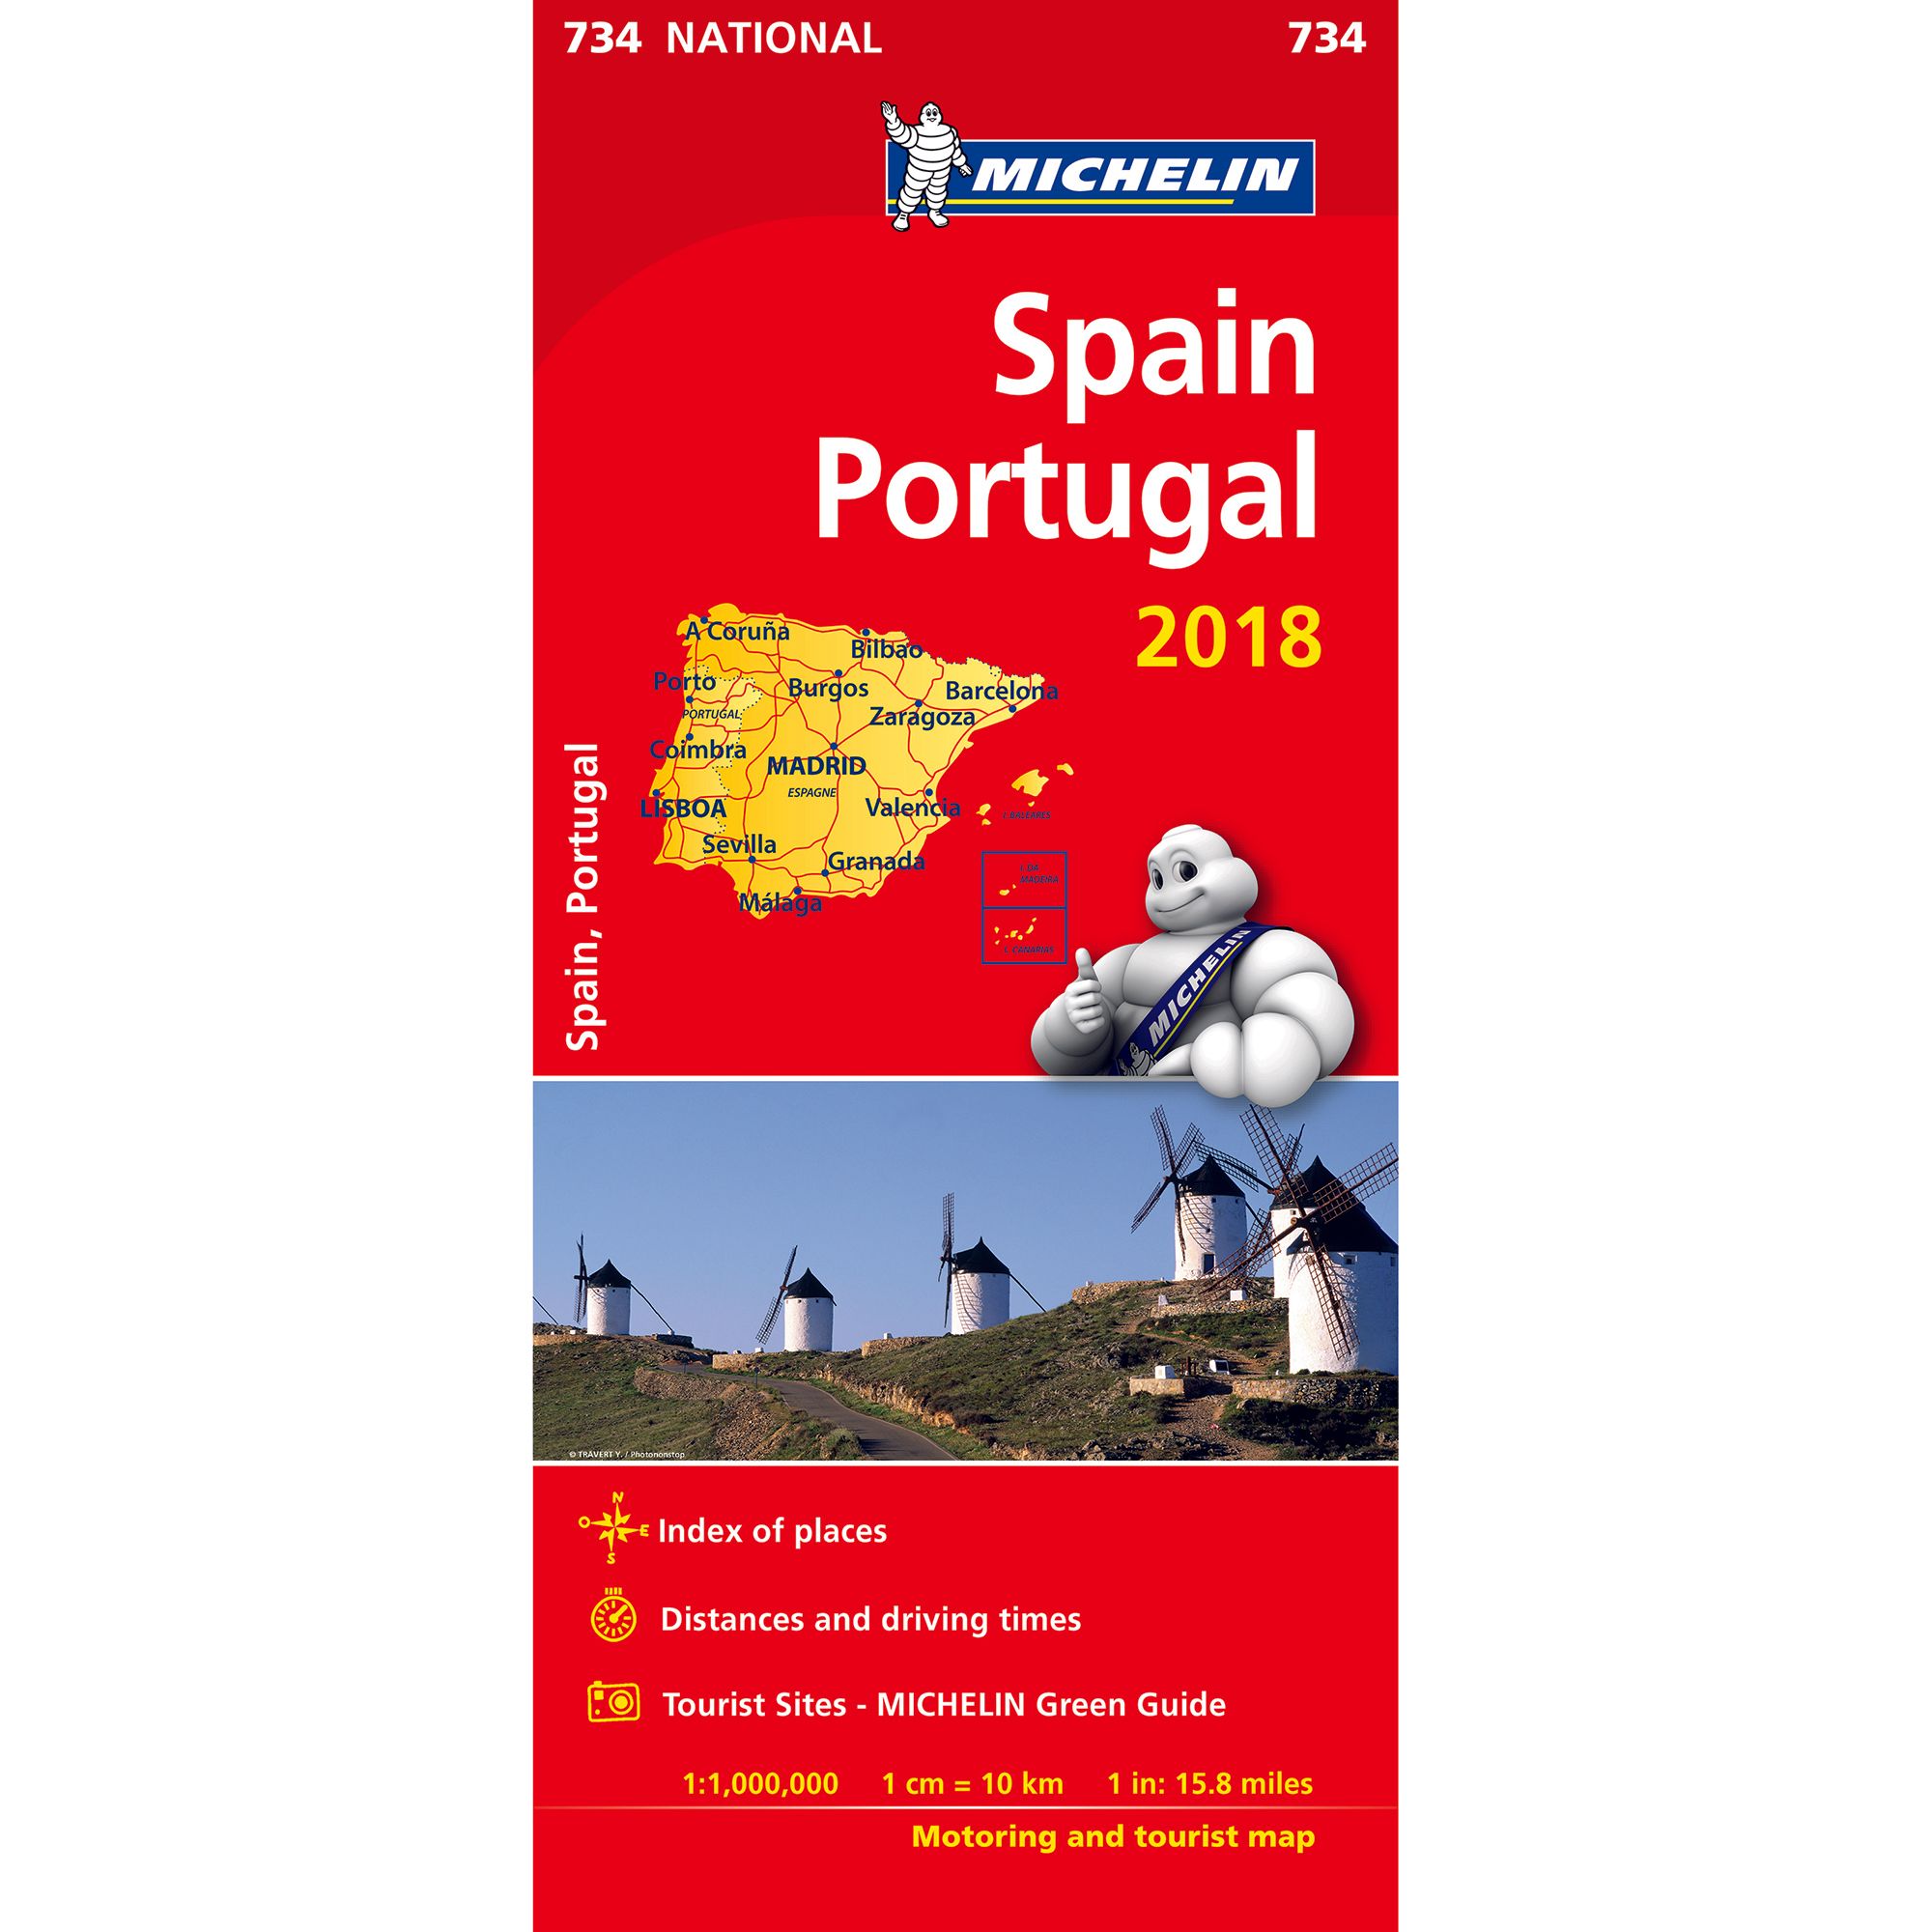 Spain &amp; Portugal 2018 National Map 734